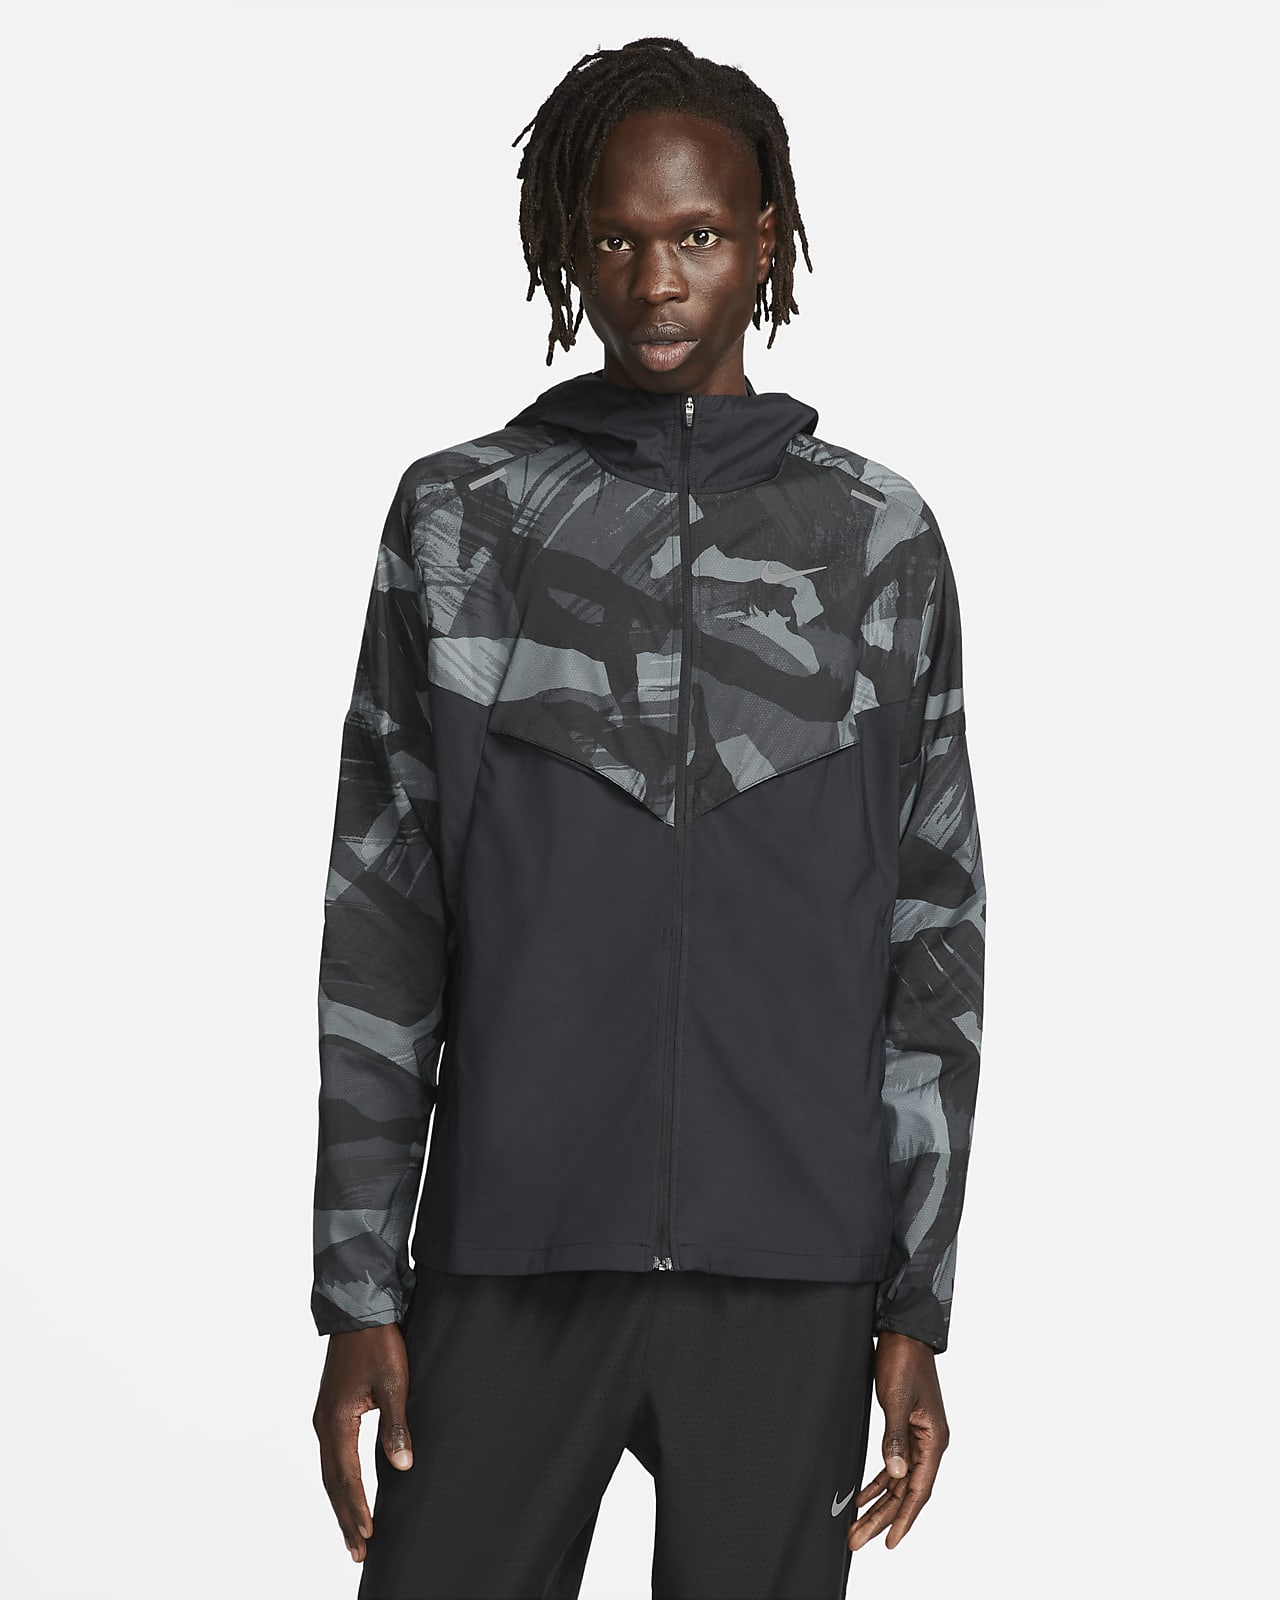 Realm mate Long Nike Repel Windrunner Men's Camo Running Jacket. Nike IL